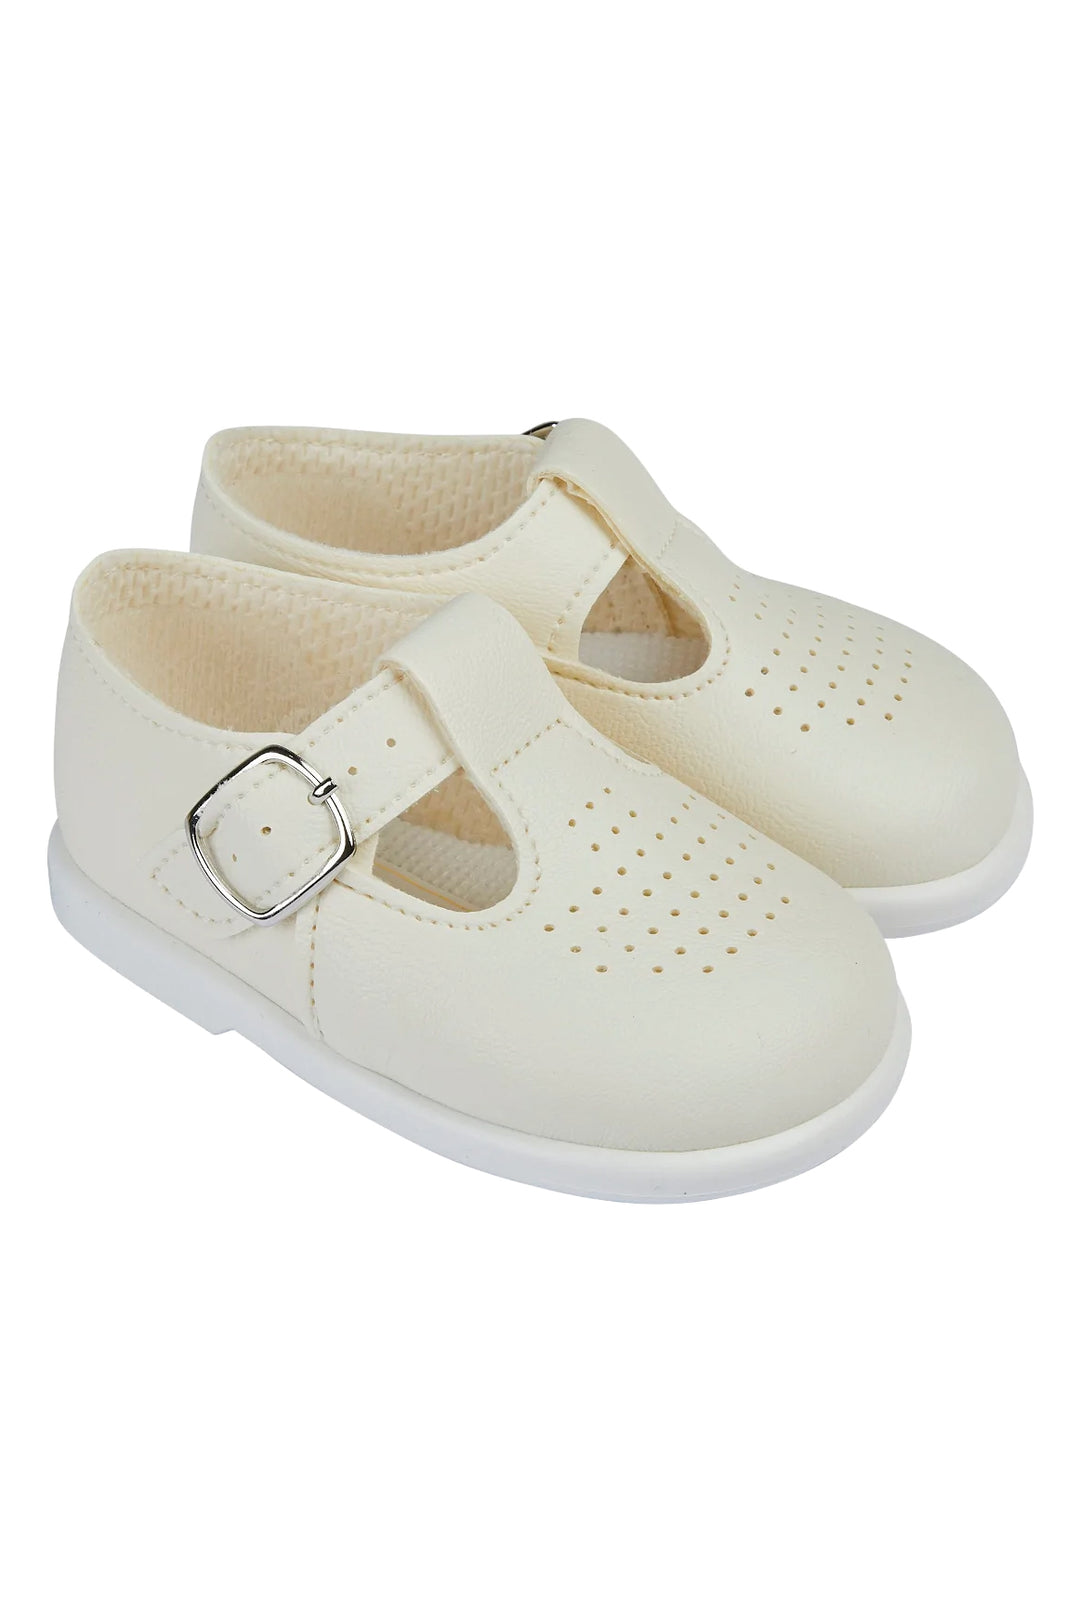 Baypods Cream T-Bar Hard Sole Shoes | Millie and John